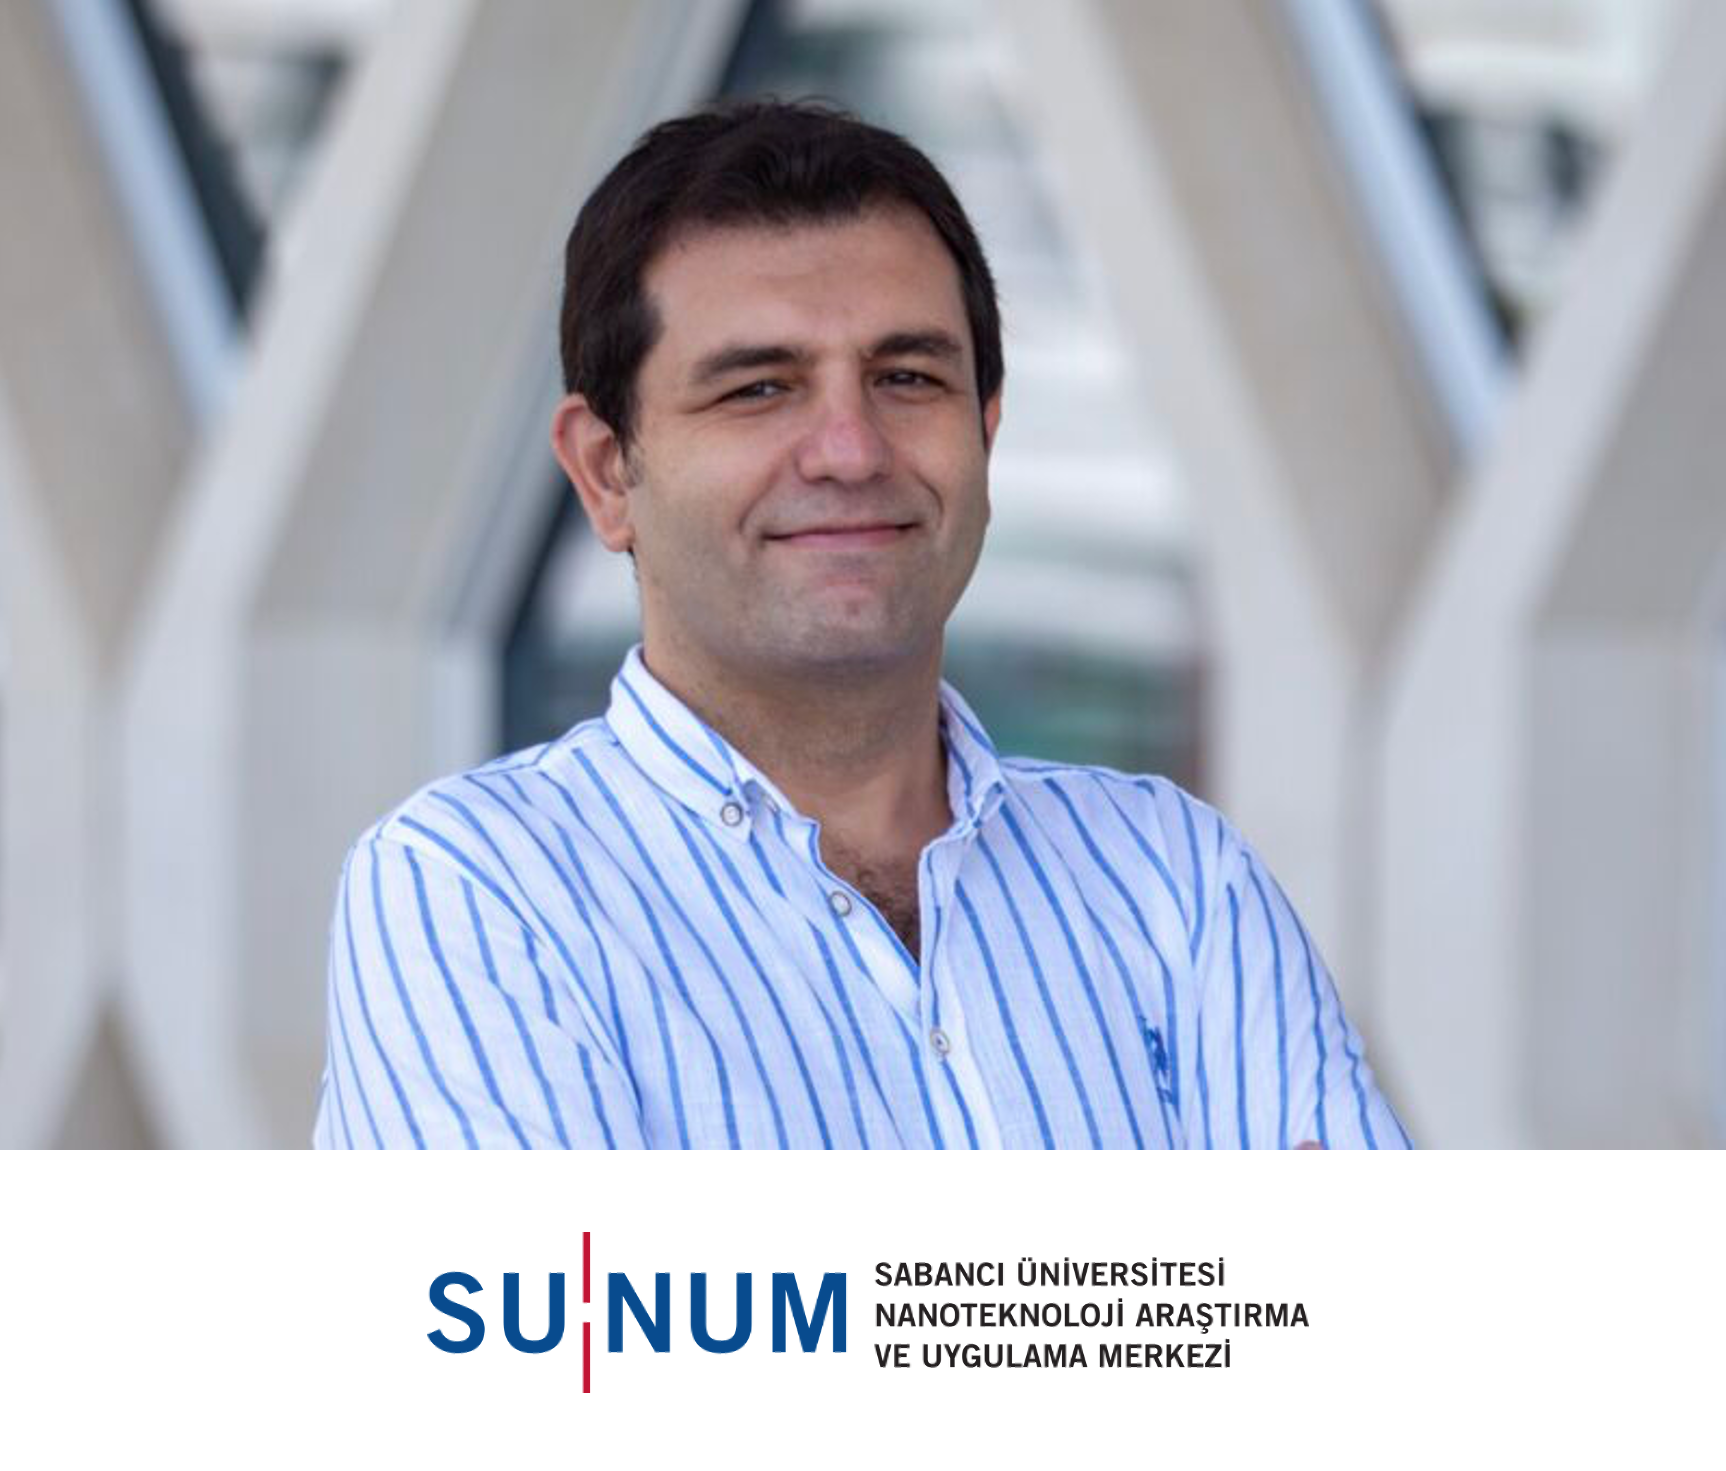 Grant Support for SUNUM Researcher from Switzerland